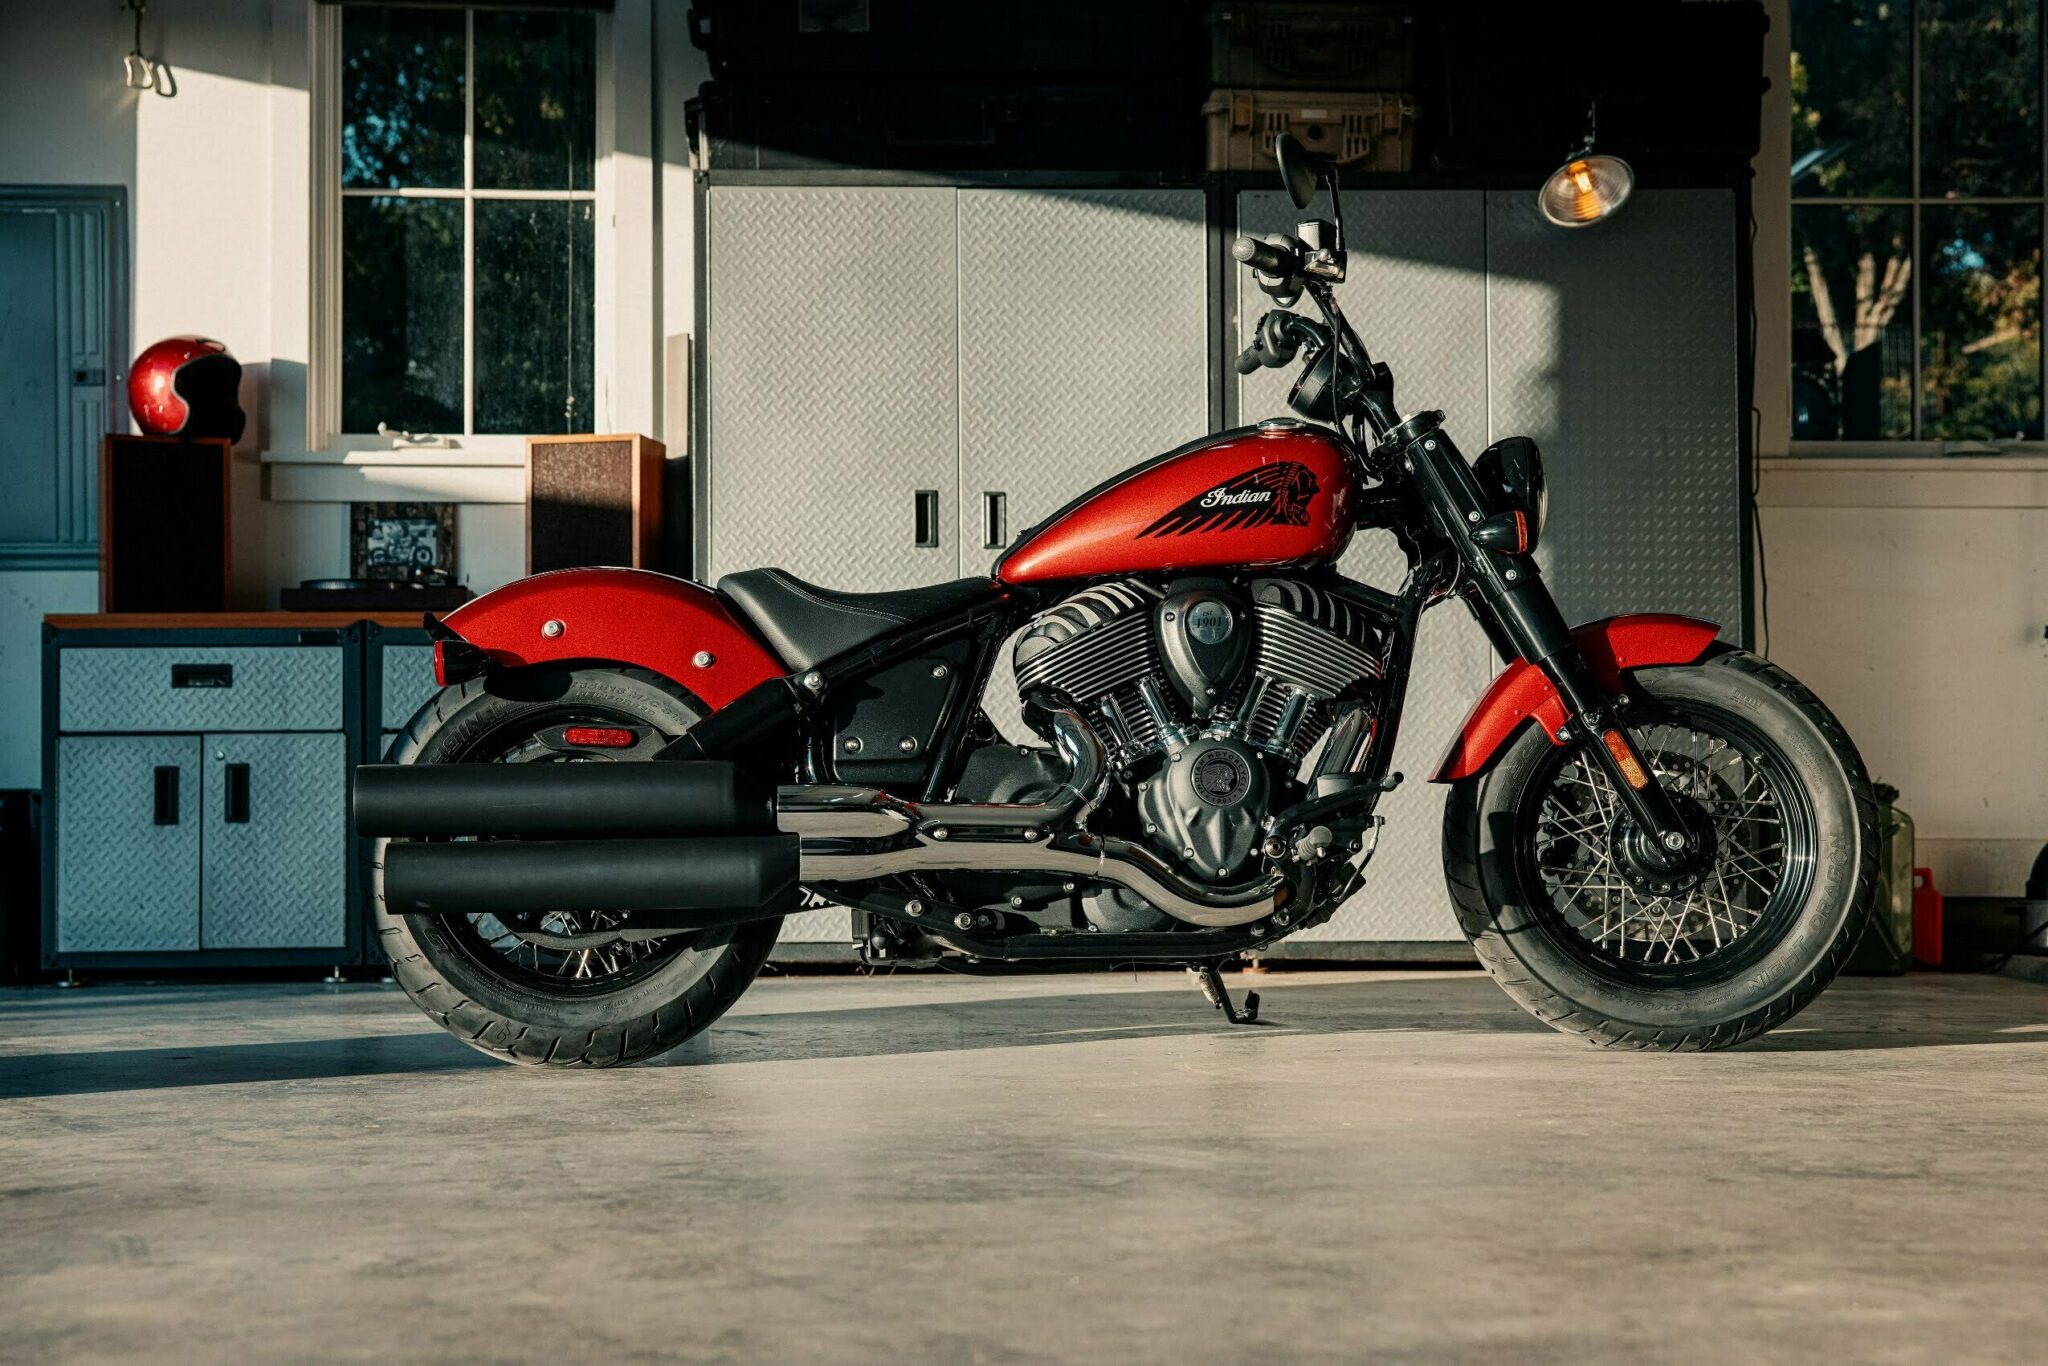 2022 Indian Chief Line Up India Price Revealed – Bookings Open For Rs 3